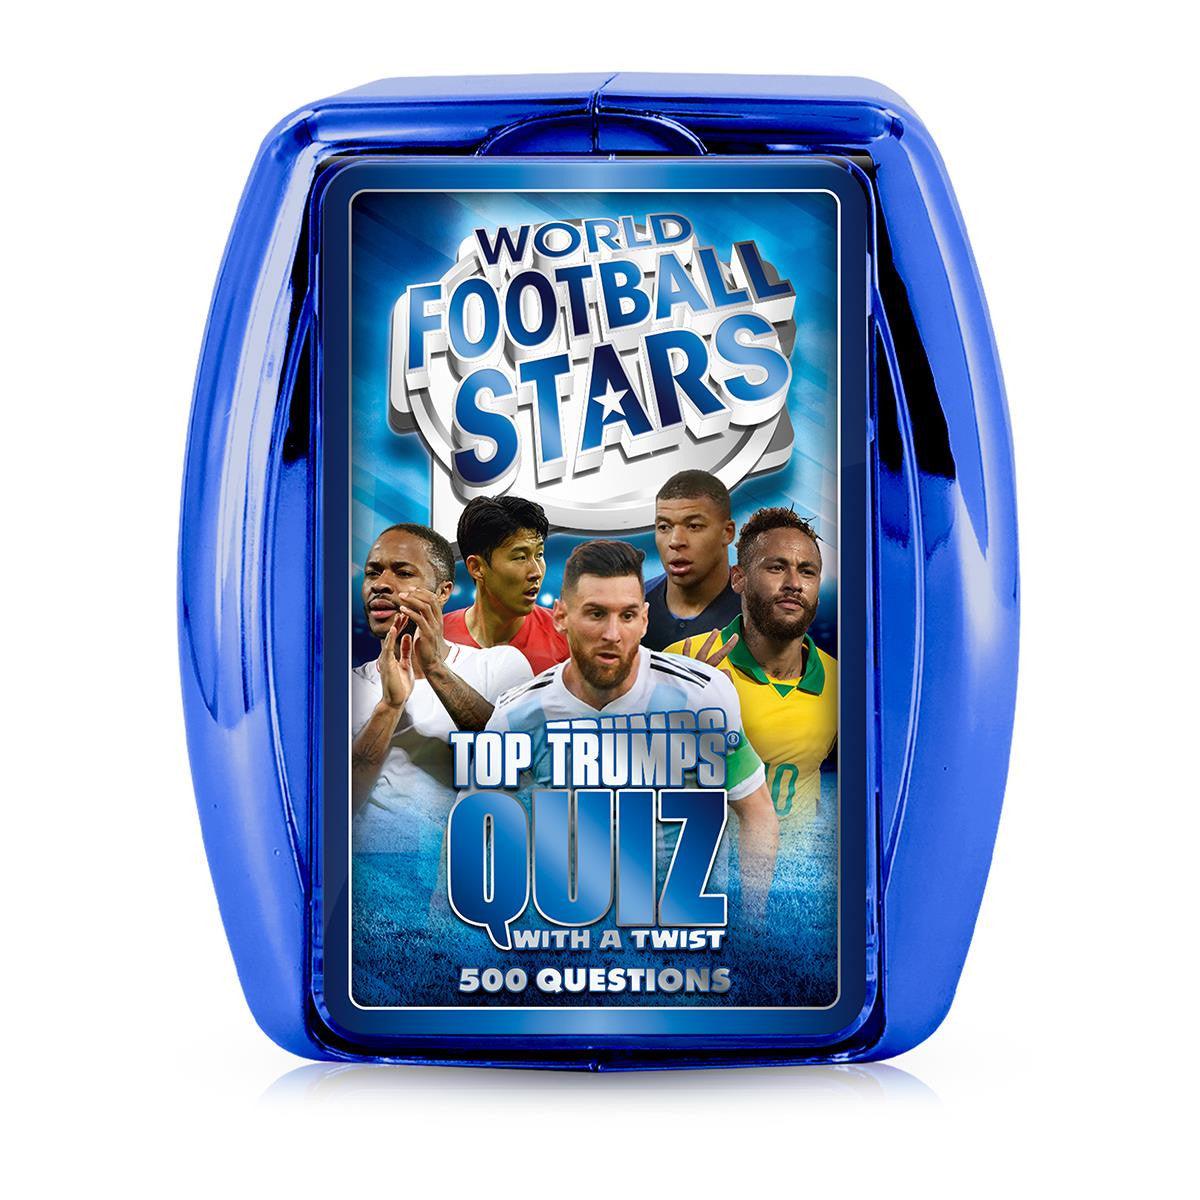 World Football Stars Top Trumps Quiz (Refreshed - Blue Case)